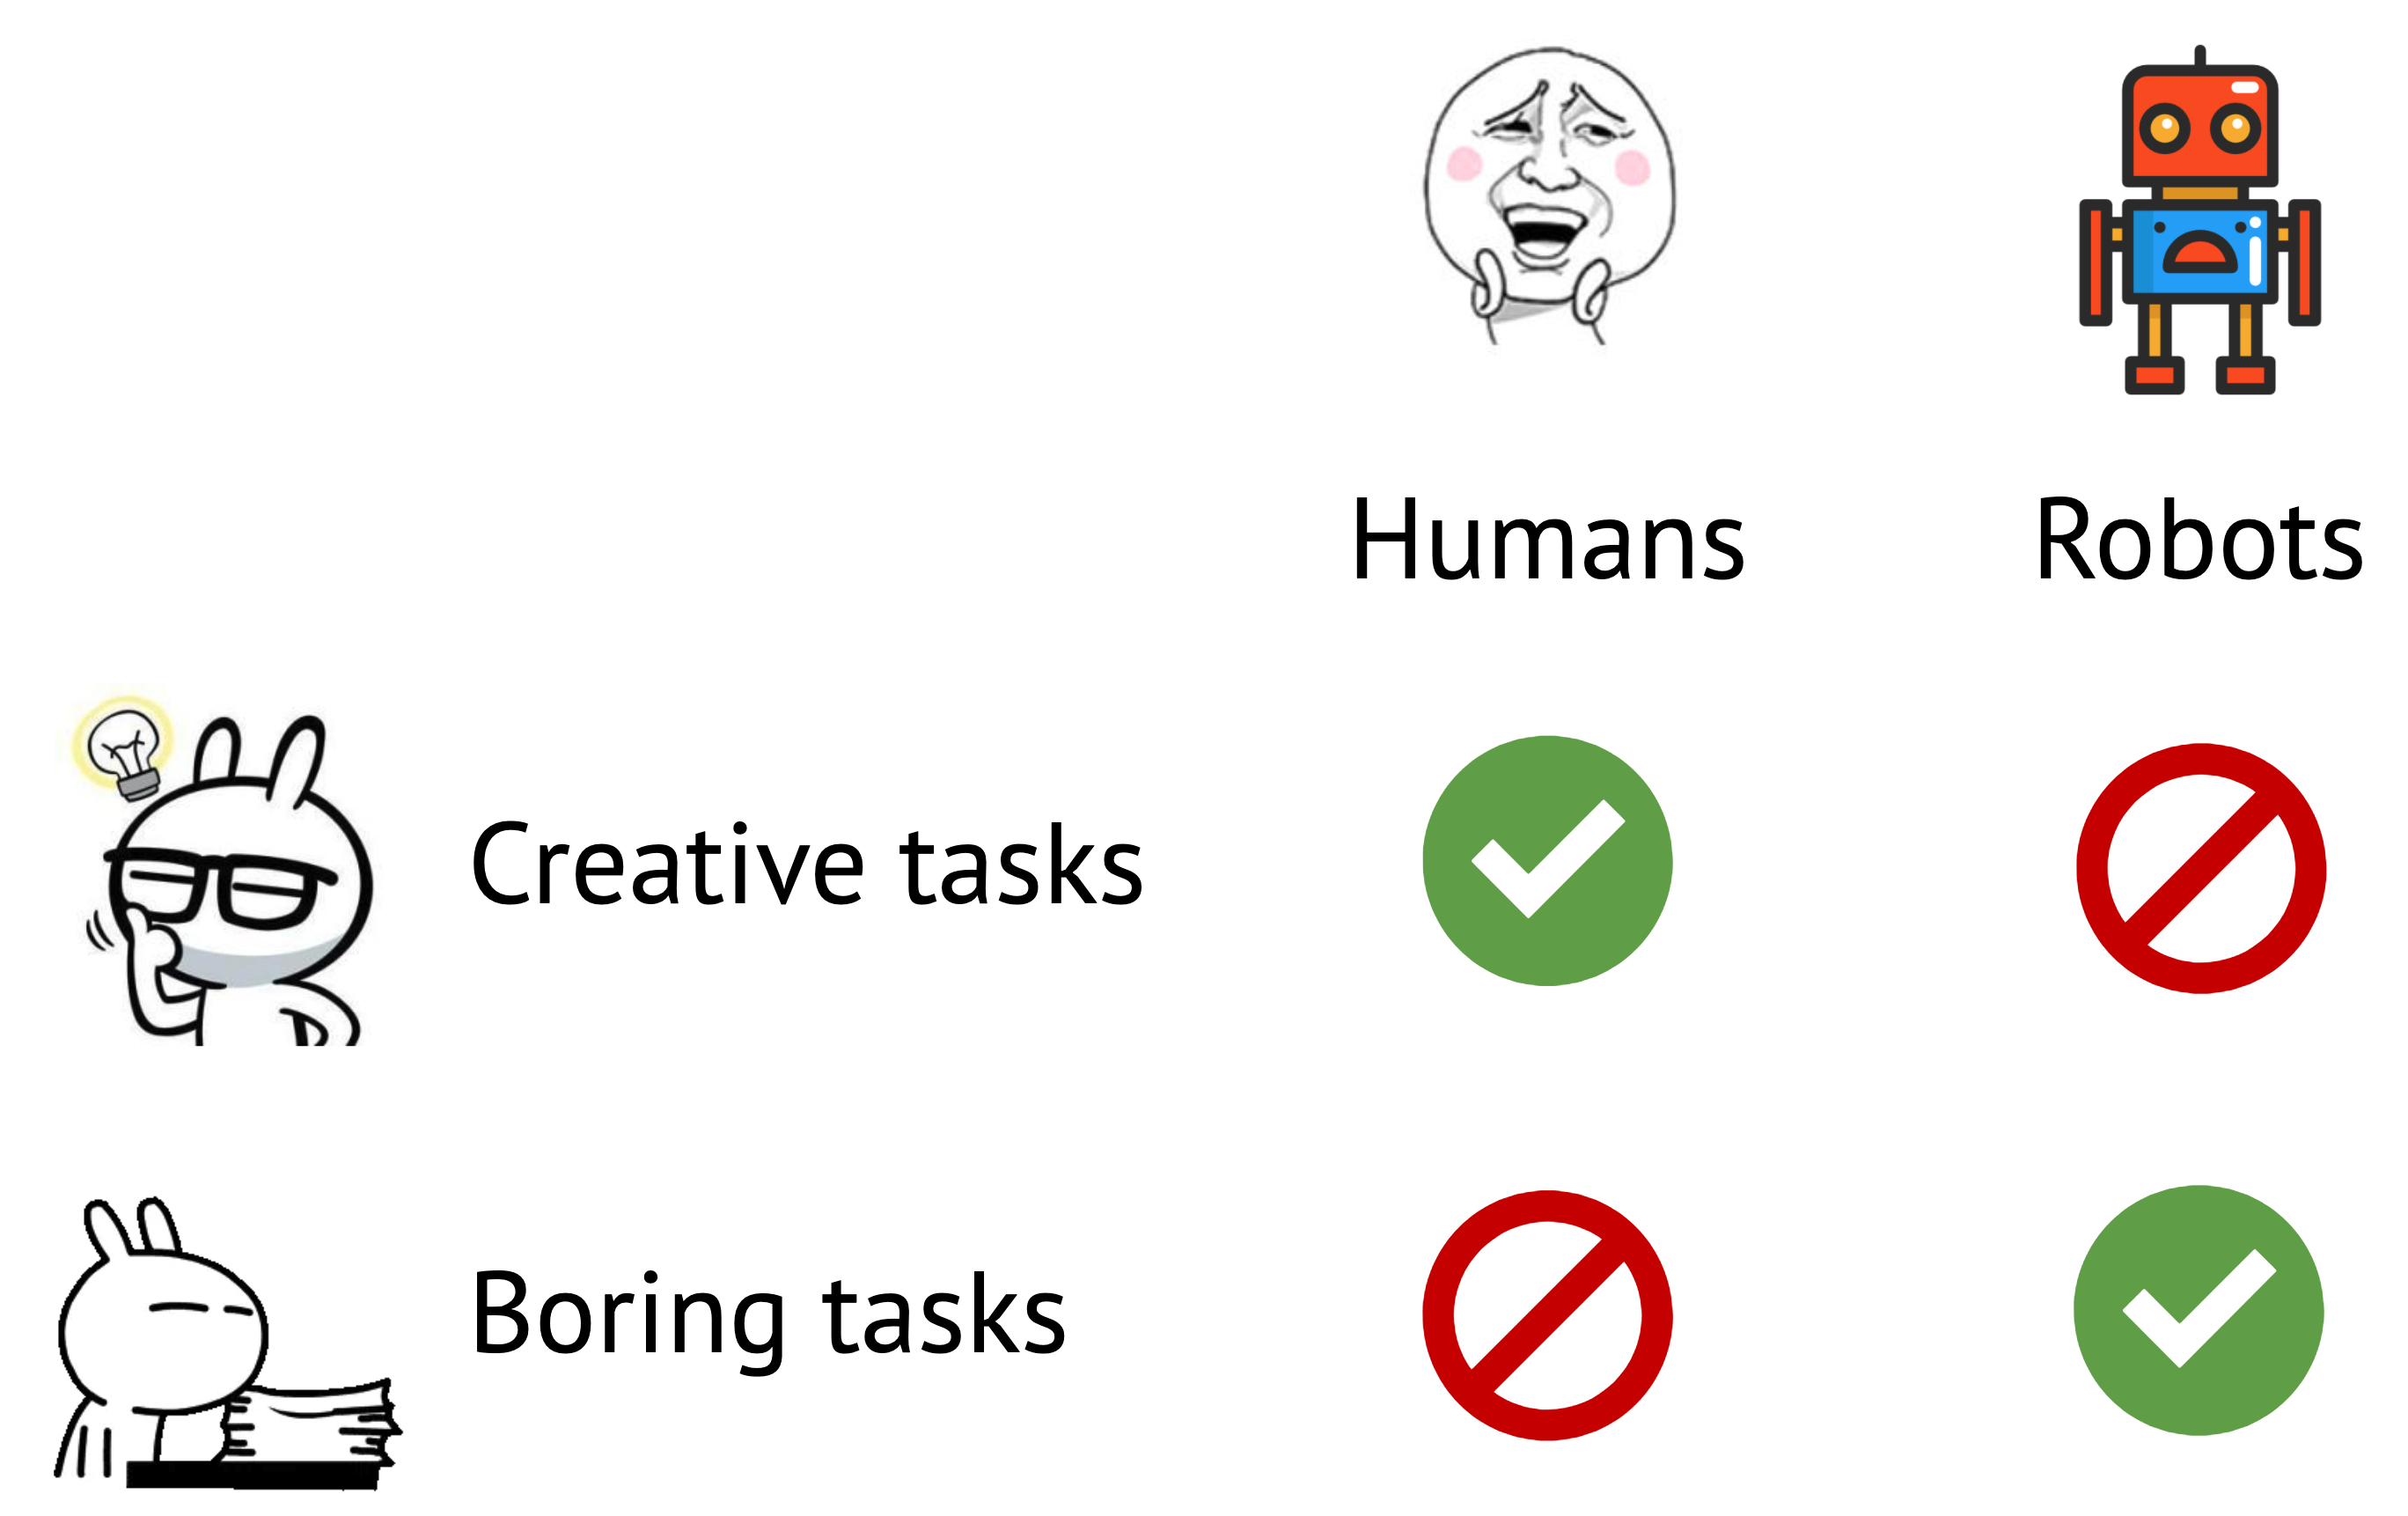 A silly chart showing that humans excel at creative tasks while robots excel at boring tasks.